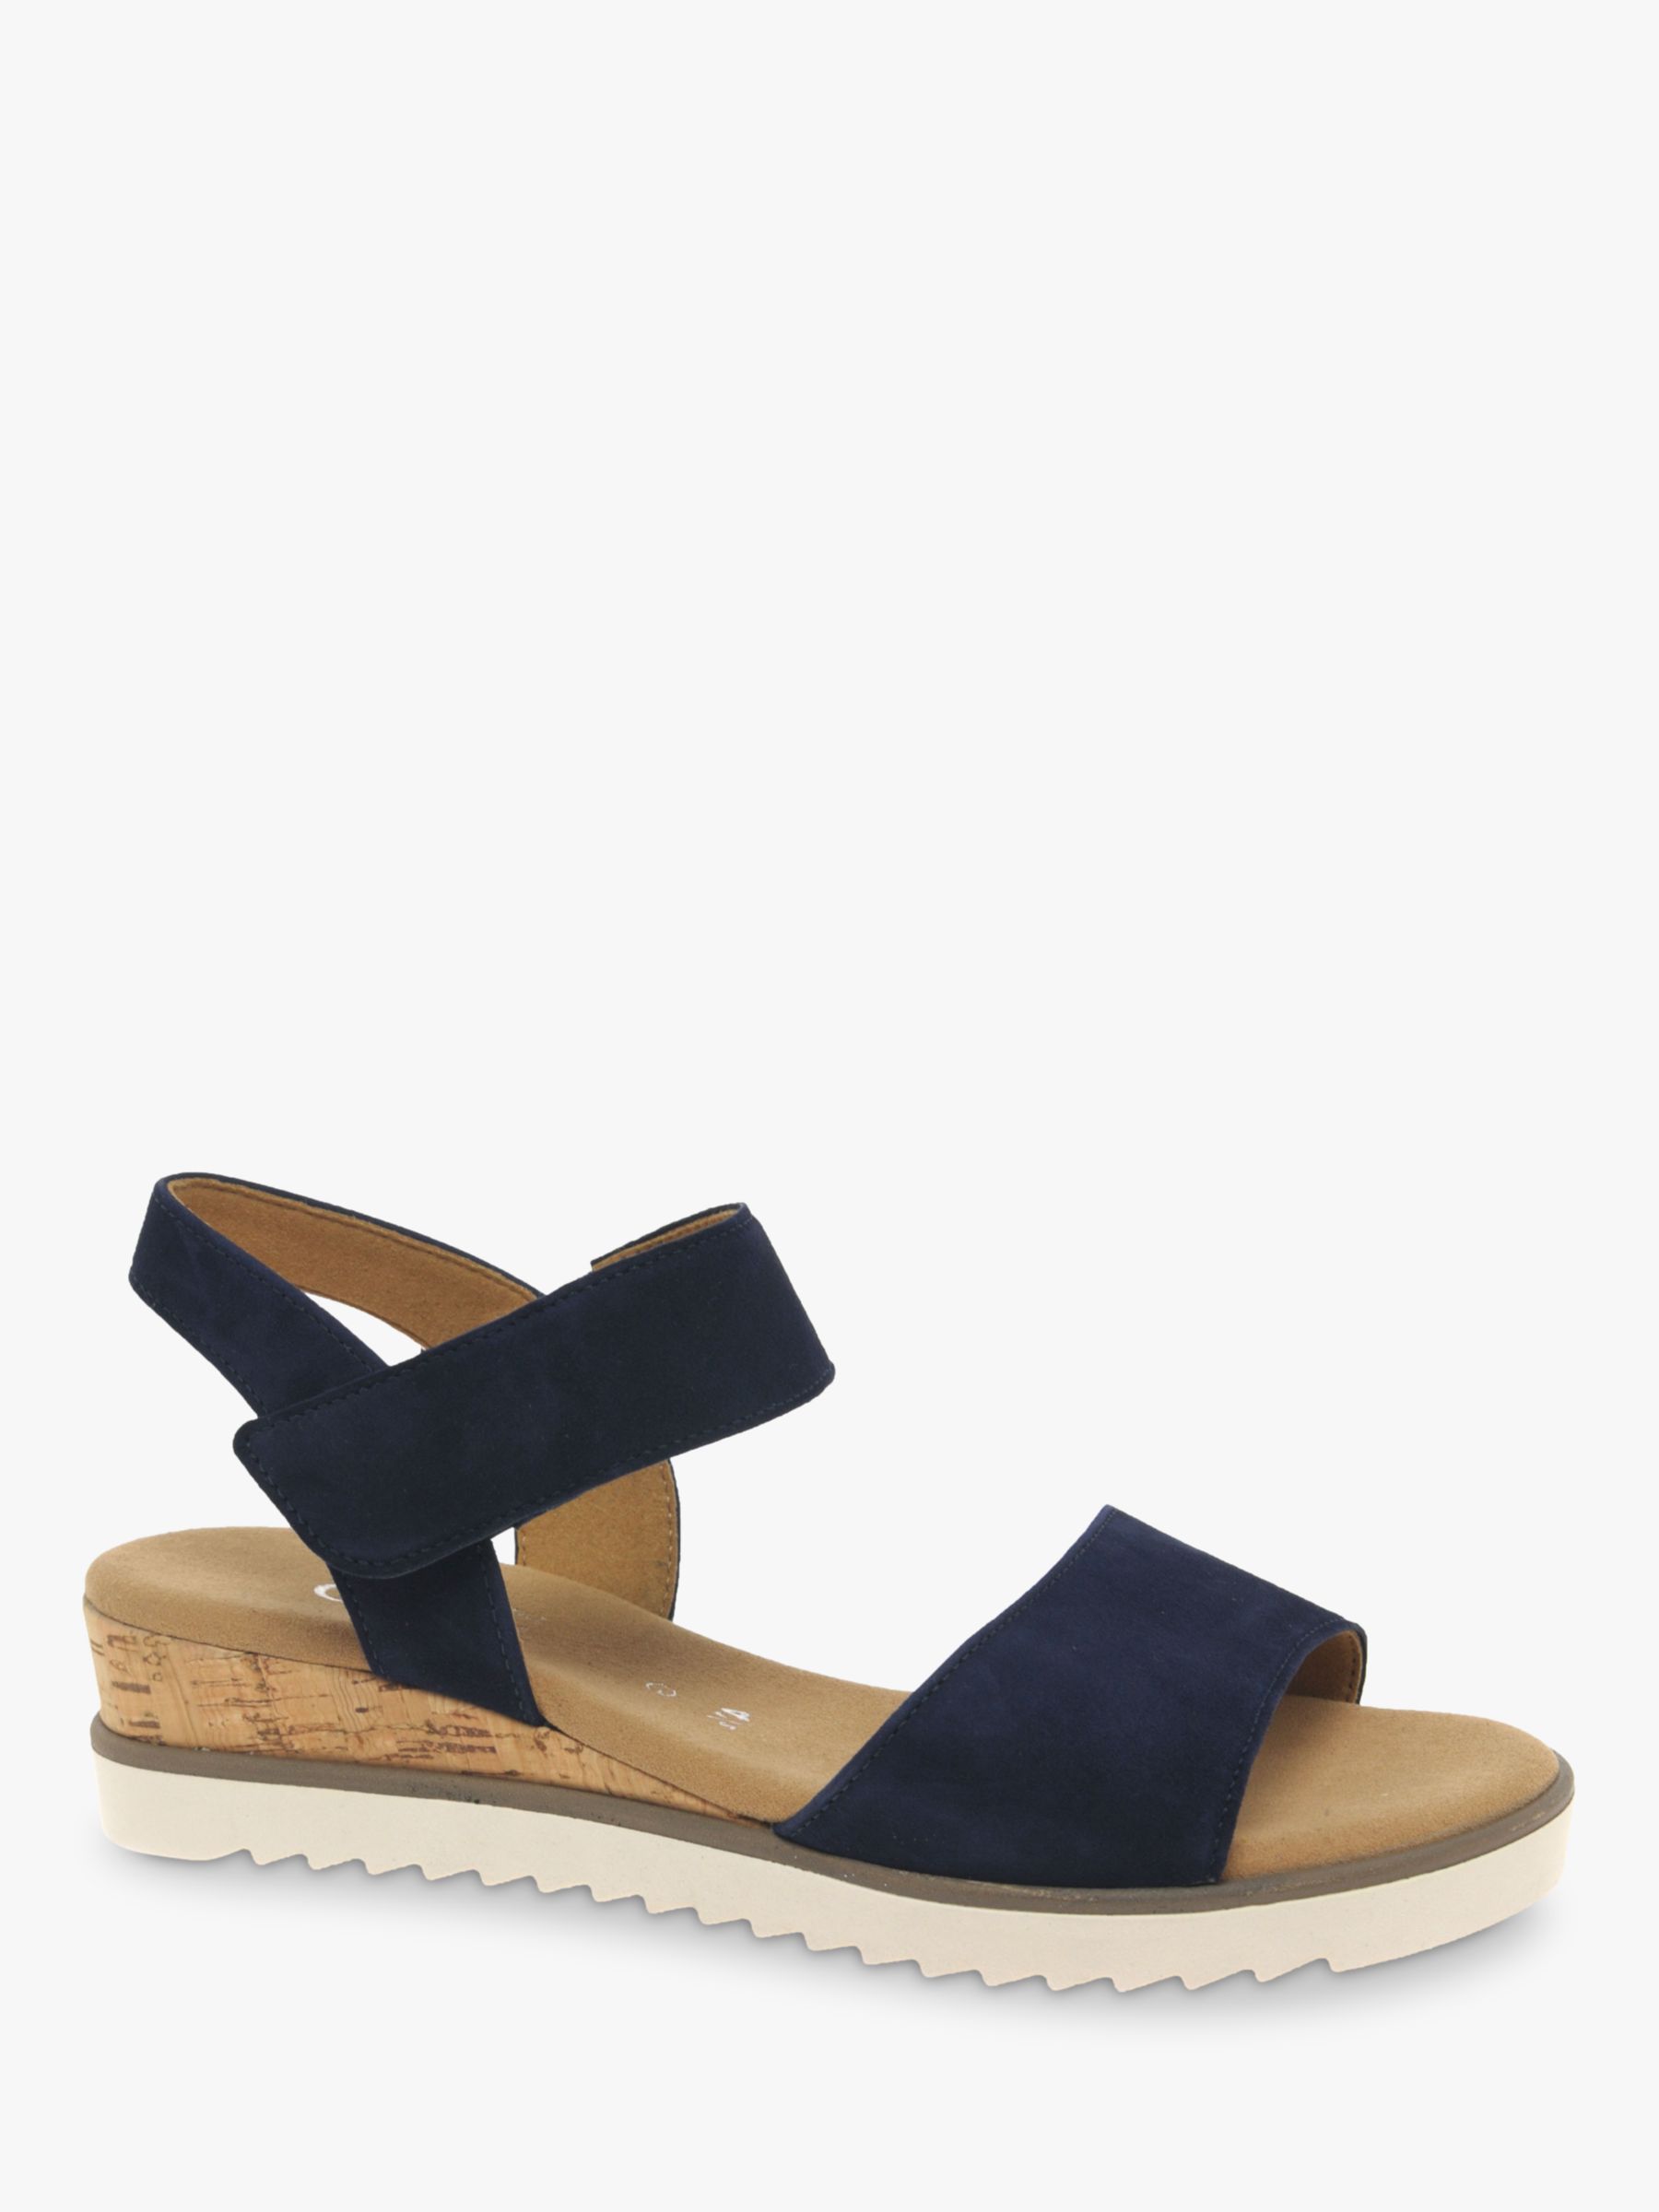 Gabor Raynor Suede Wide Fit Sandals, Blue at John Lewis & Partners